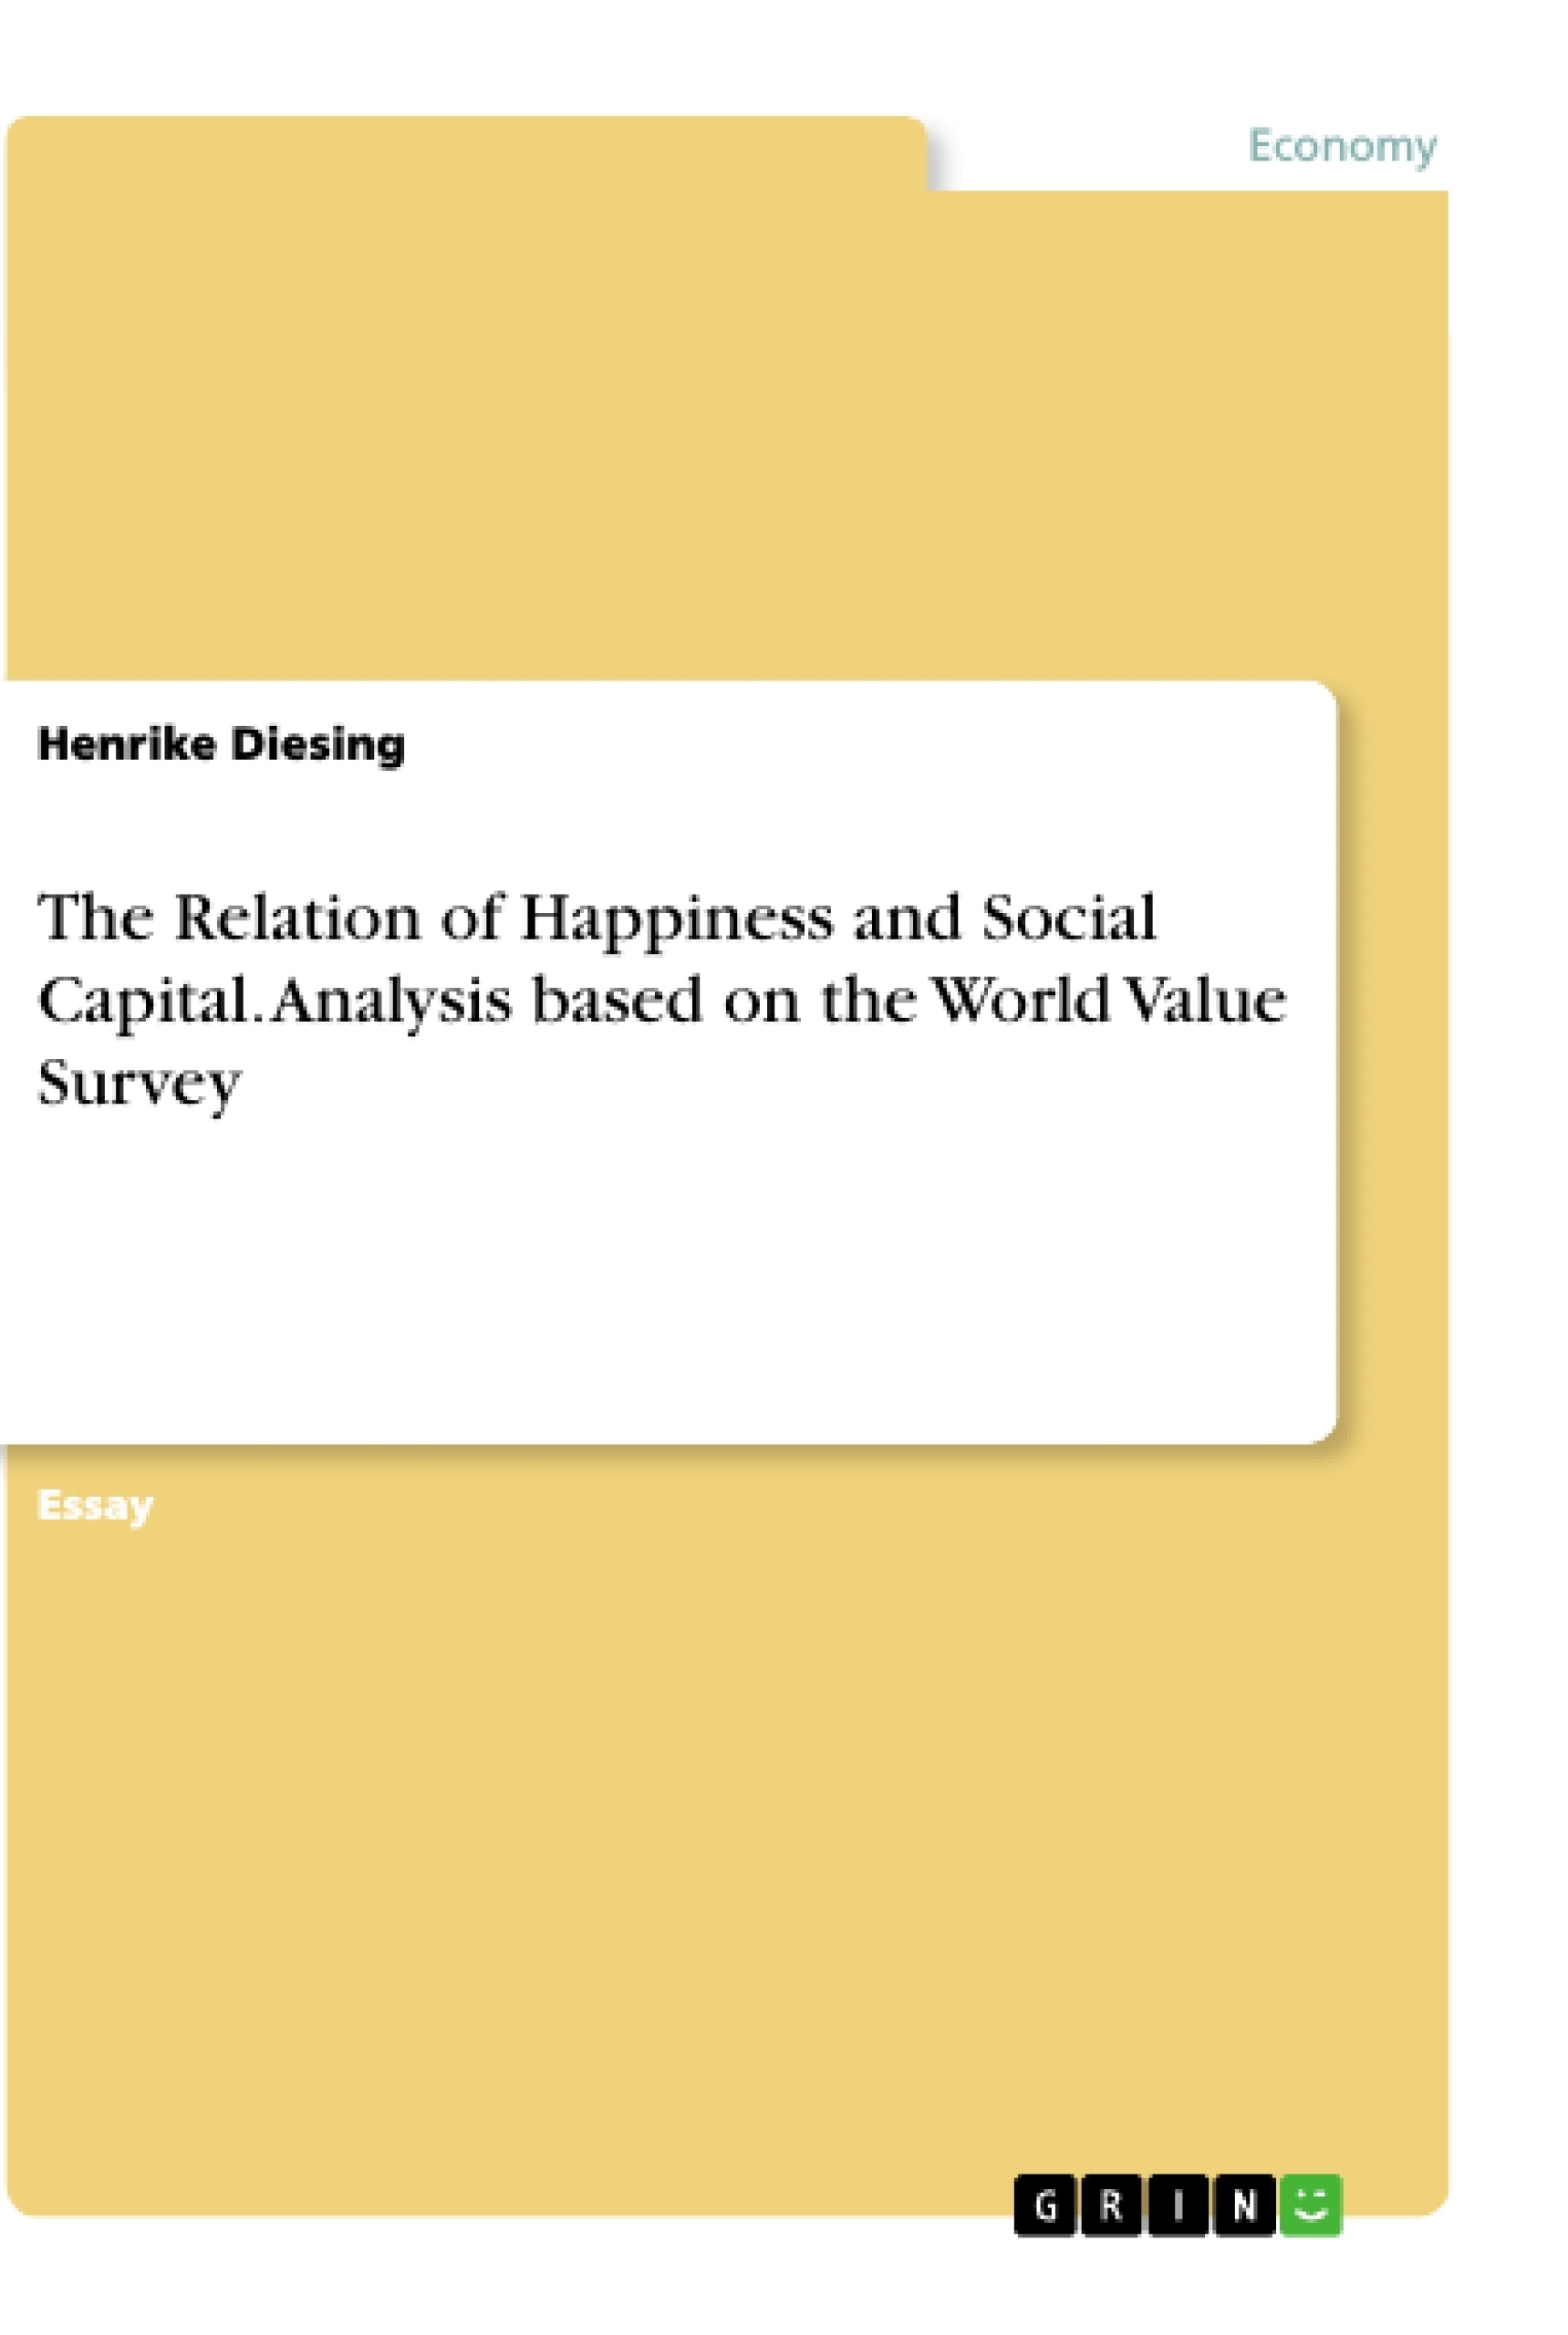 Titre: The Relation of Happiness and Social Capital. Analysis based on the World Value Survey